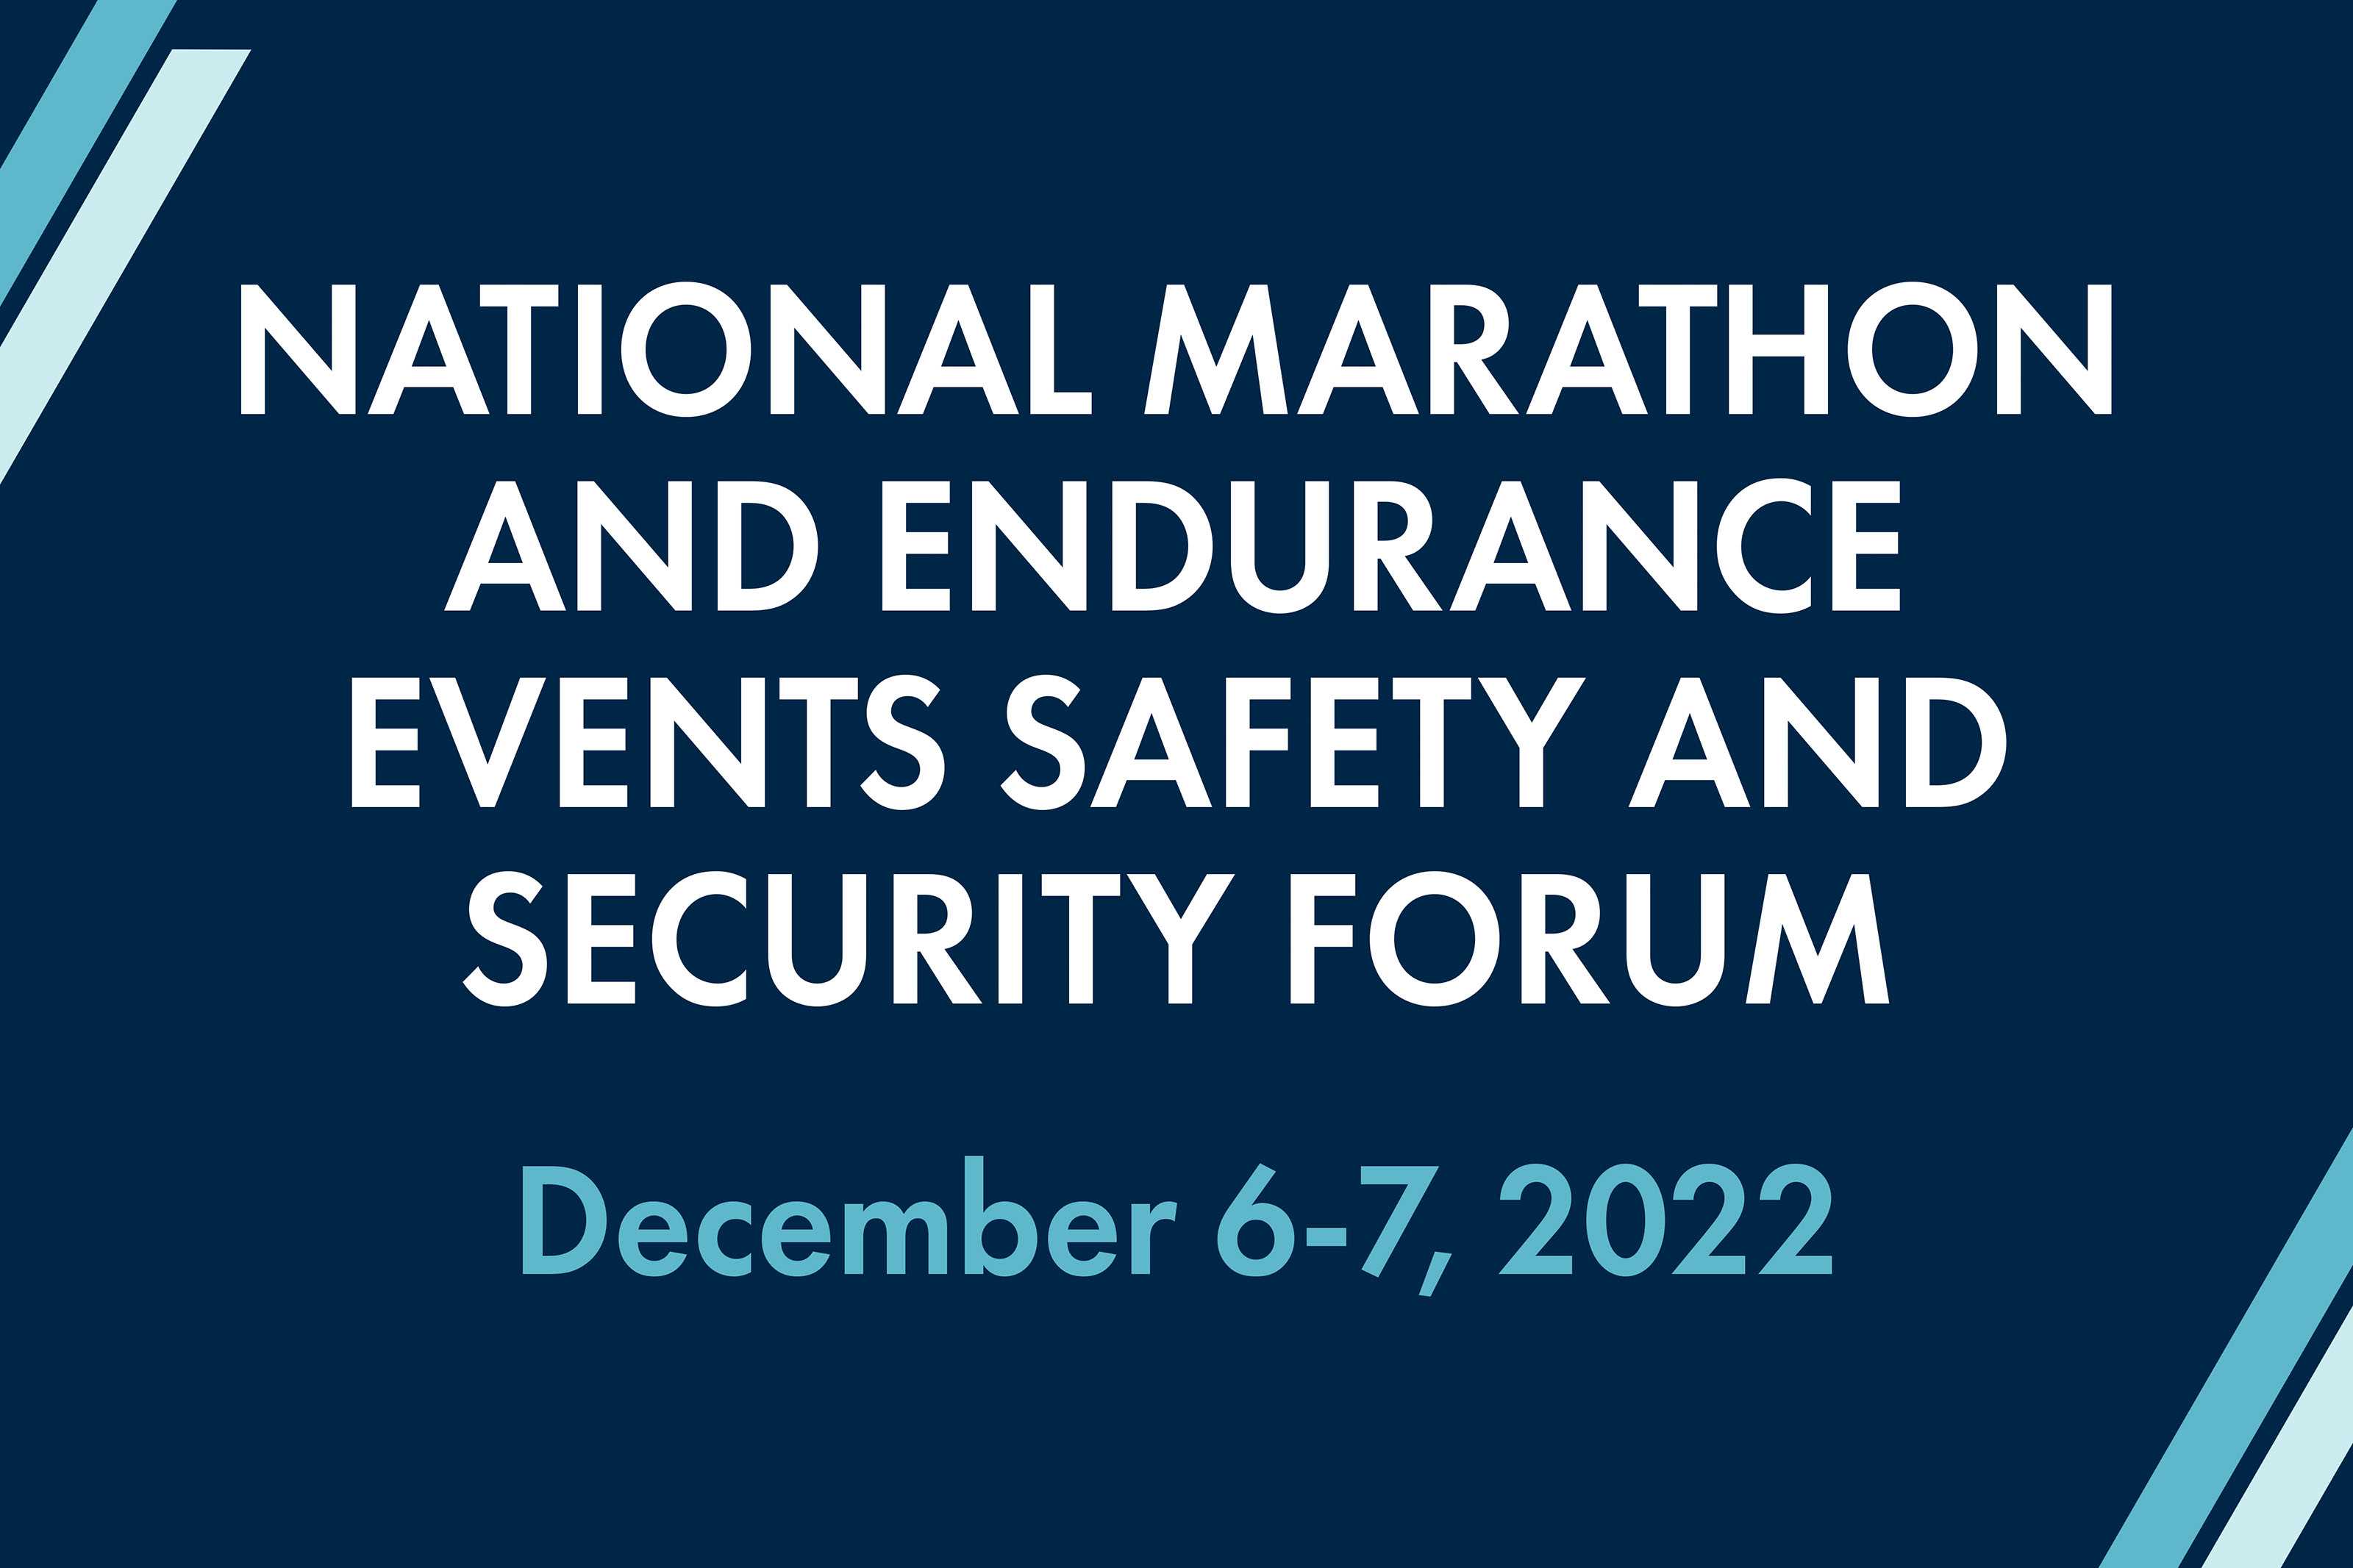 ninth annual Marathon and Endurance Events Safety and Security Forum on December 6-7, 2022